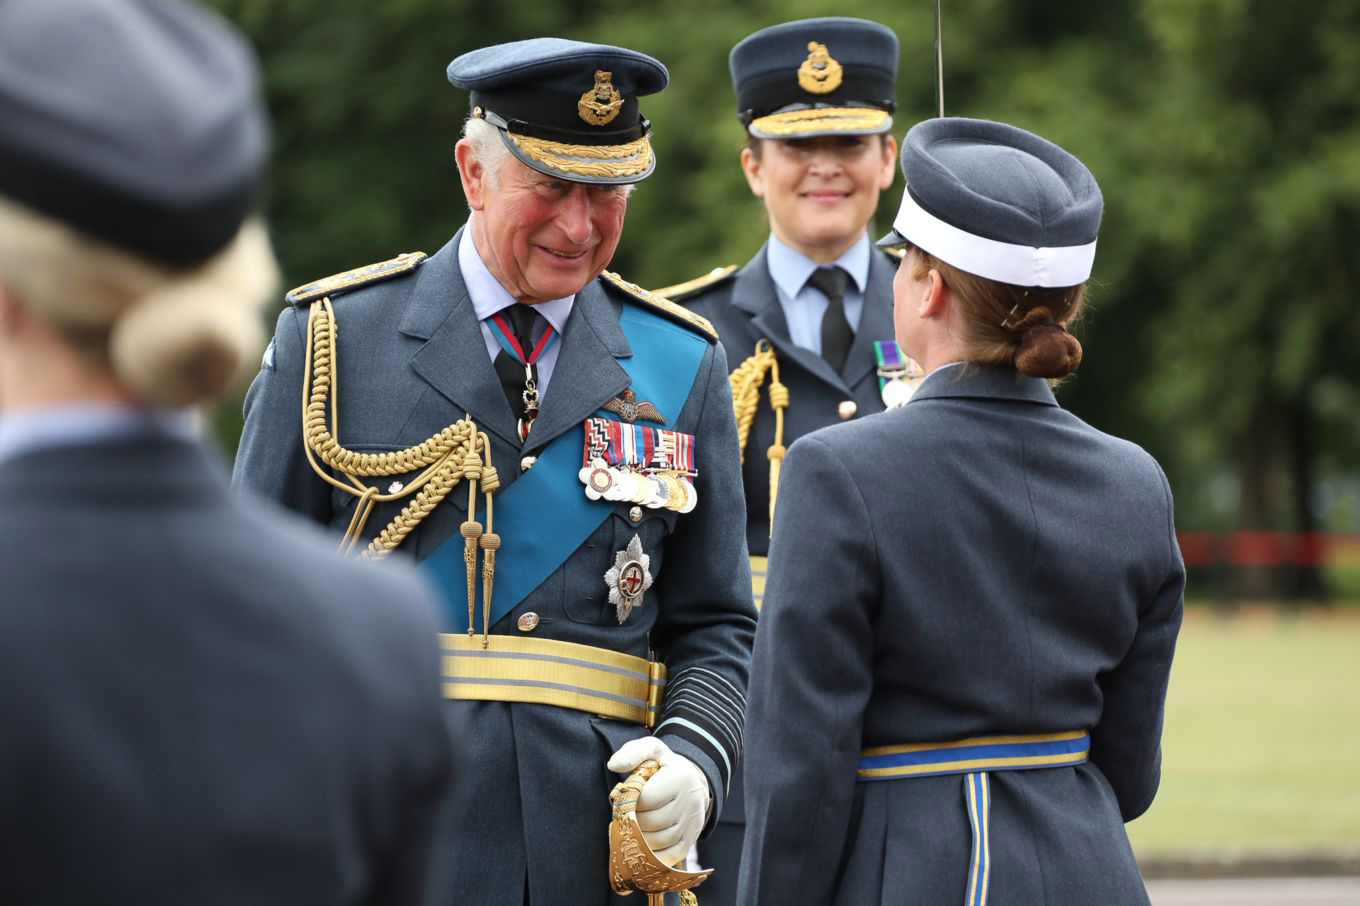 Above: RAF College Cranwell Graduation of the King’s Squadron and Sovereign’s Review. Image by Linda Lowing, © UK MoD Crown Copyright 2020.